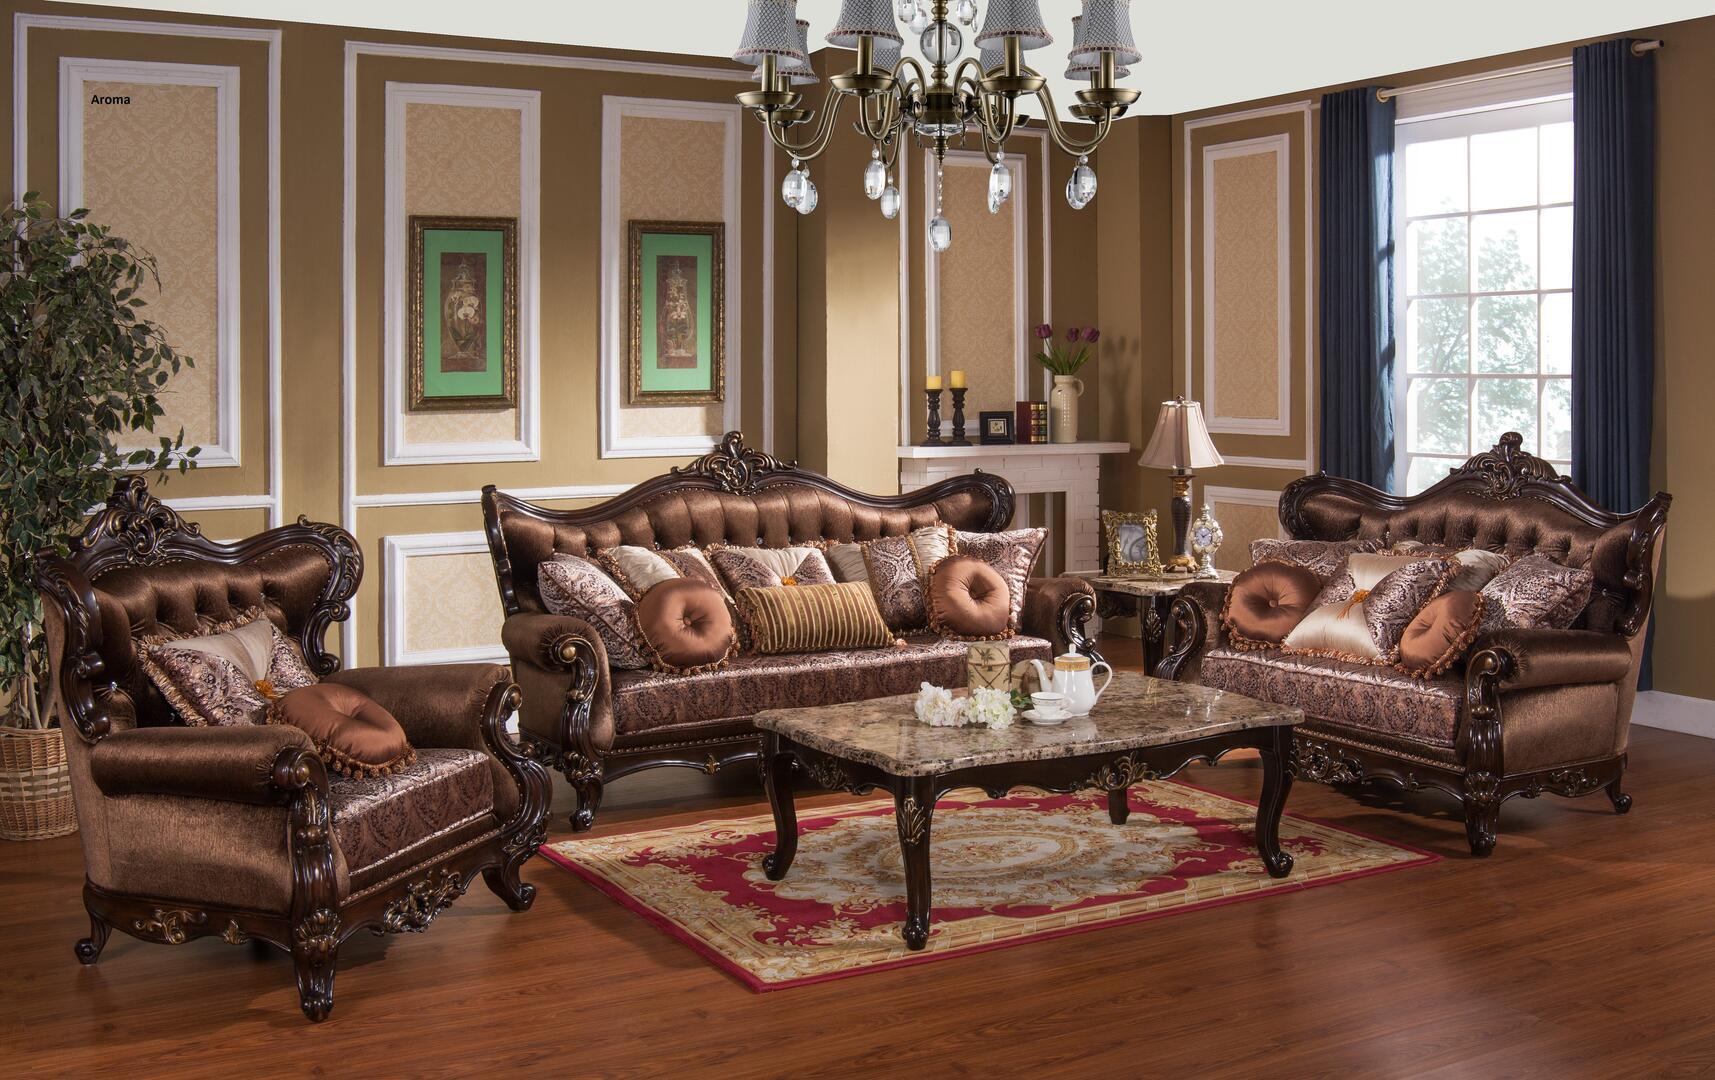 

    
Cherry Finish Wood Sofa Set 6Pcs w/Occasional Tables Traditional Cosmos Furniture Aroma
